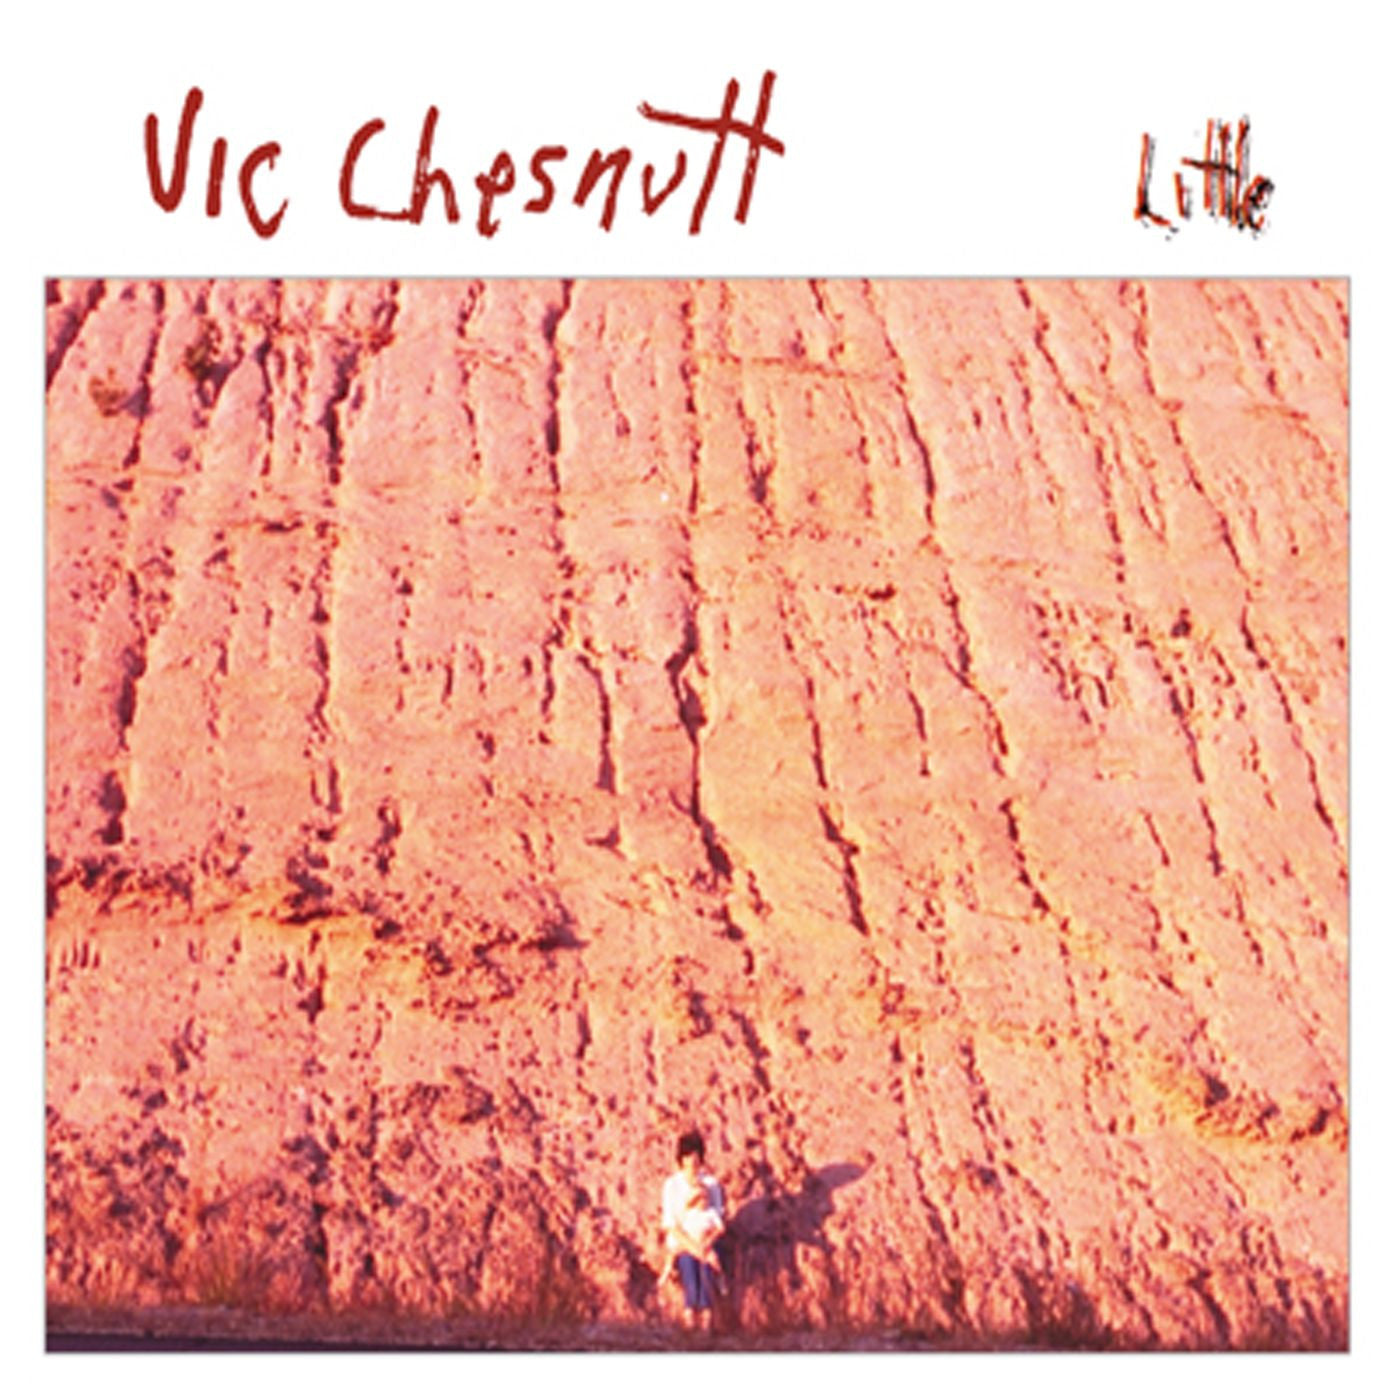 Chesnutt, Vic - Little (Indie Exclusive, Limited Edition Green/Red Split Color Vinyl)